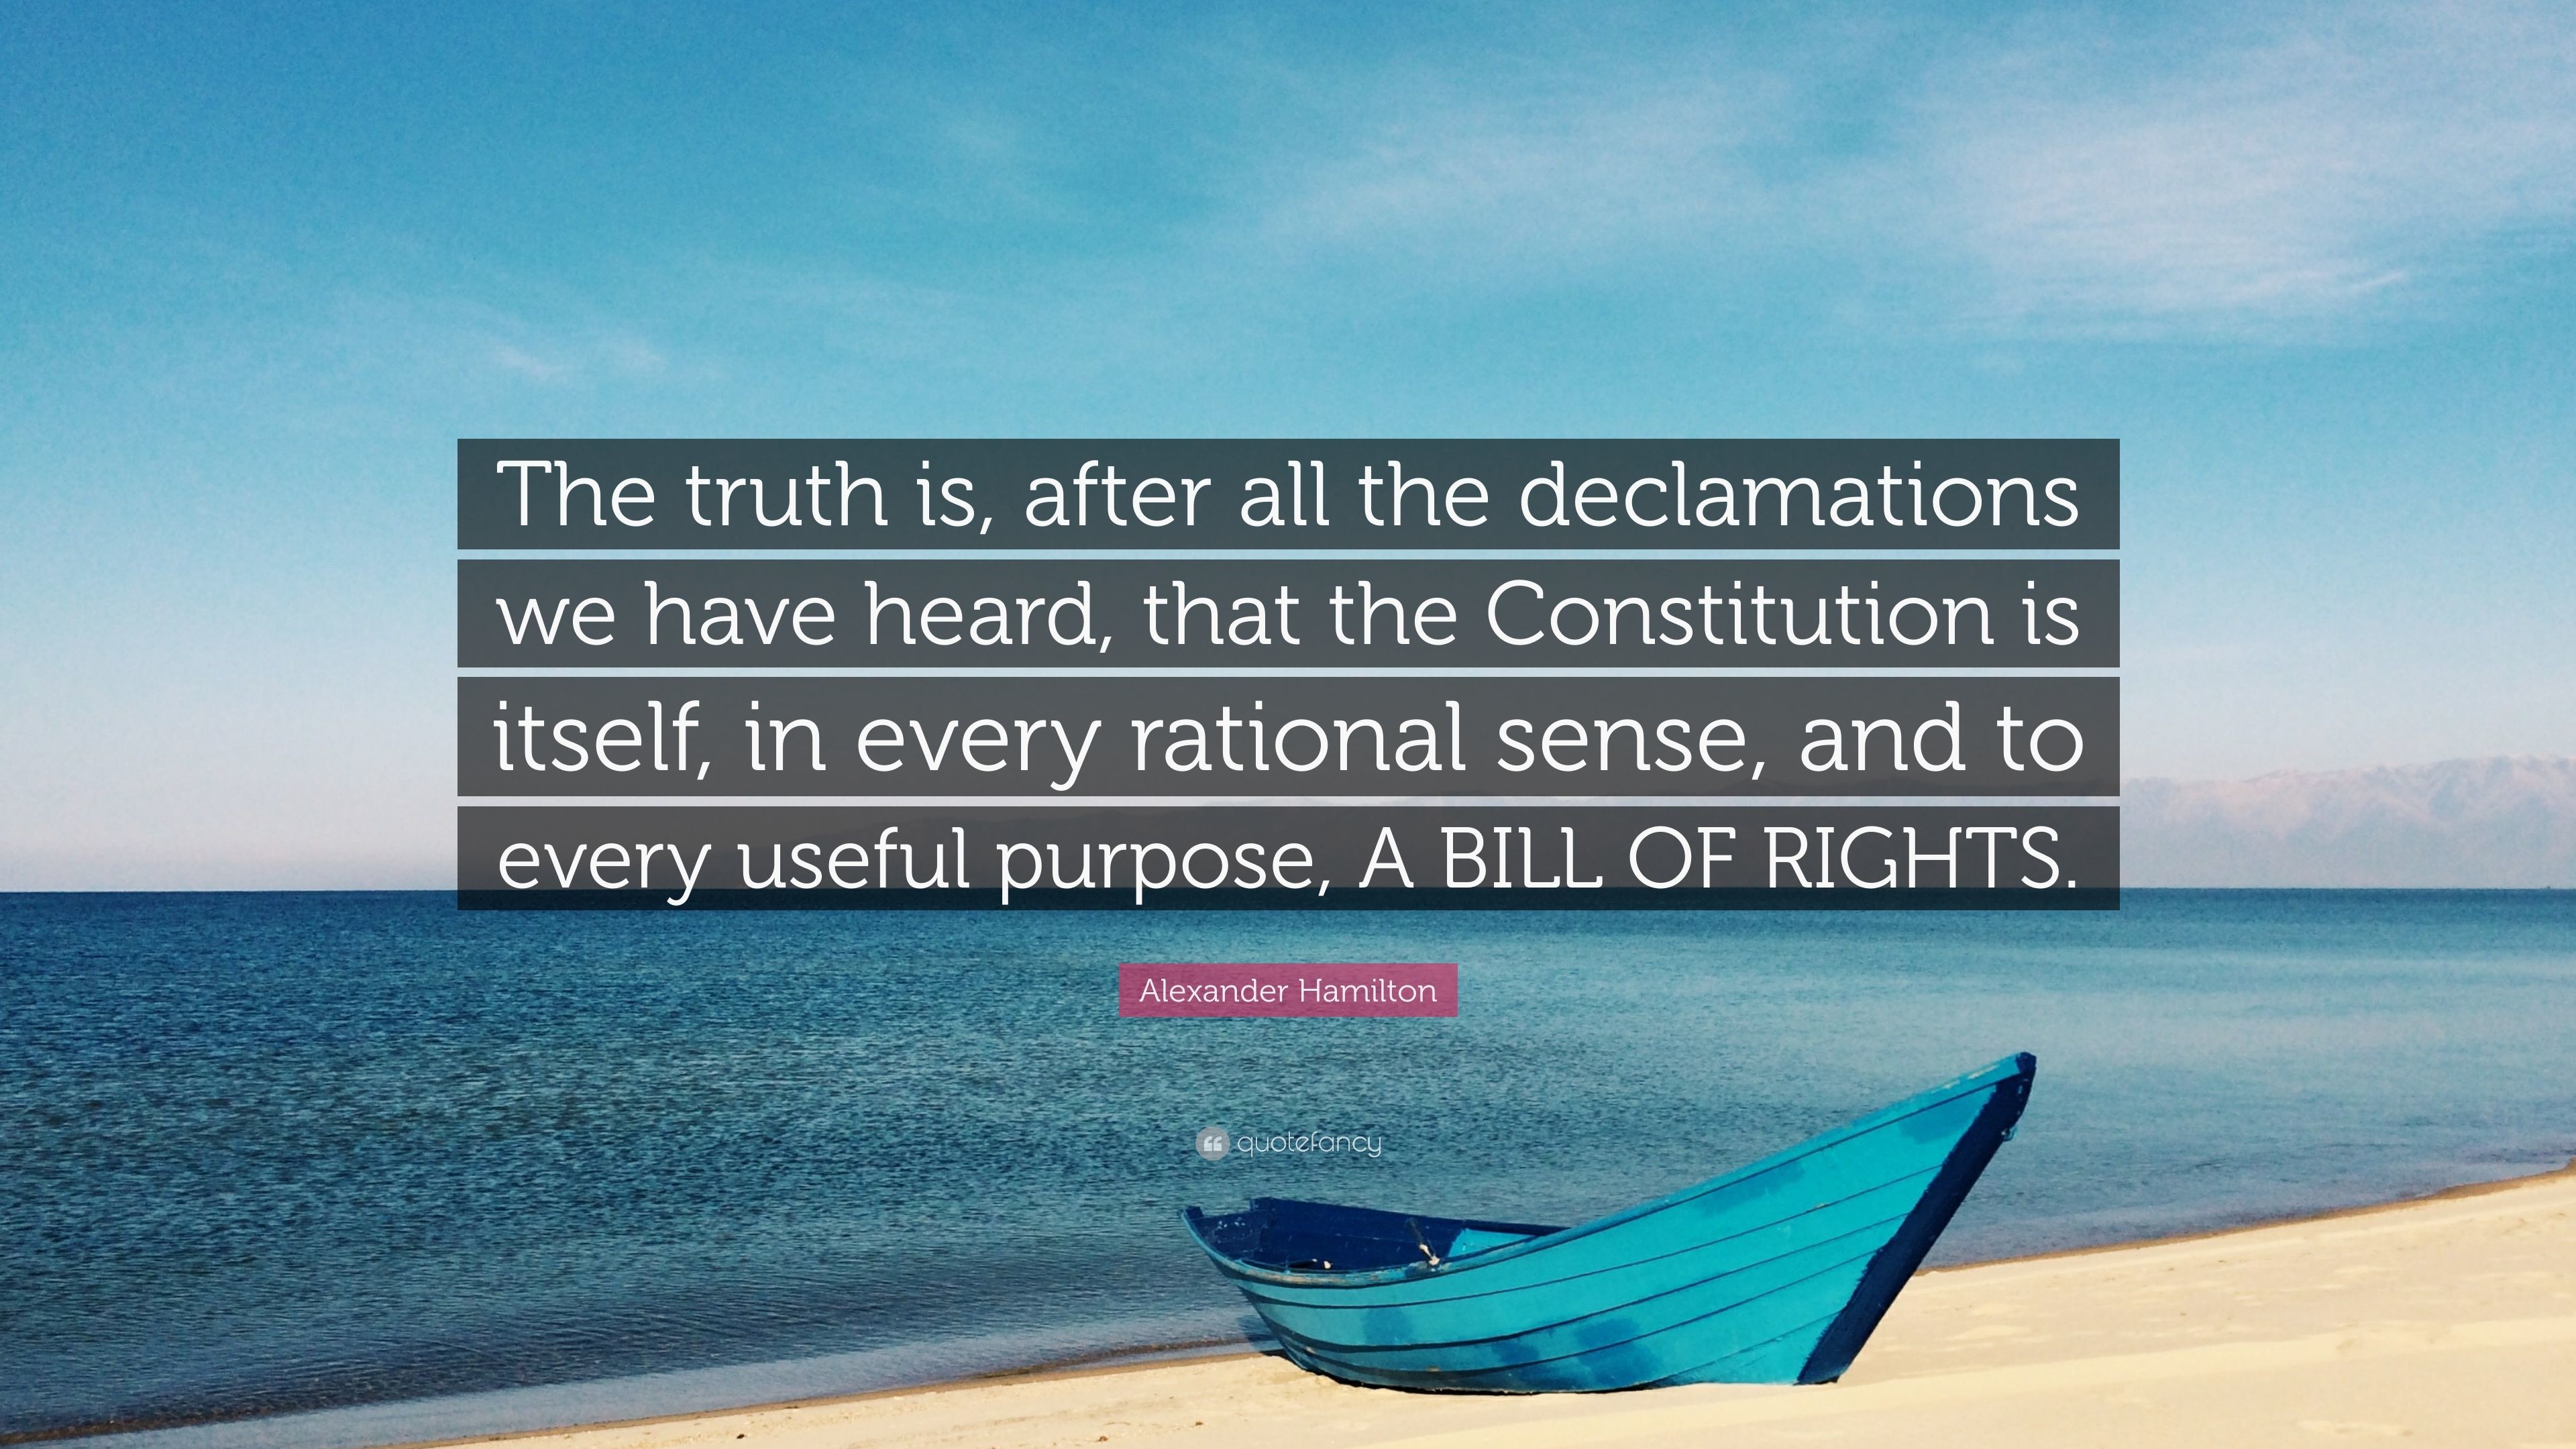 3840x2160 Alexander Hamilton Quote: “The truth is, after all the declamations we have  heard